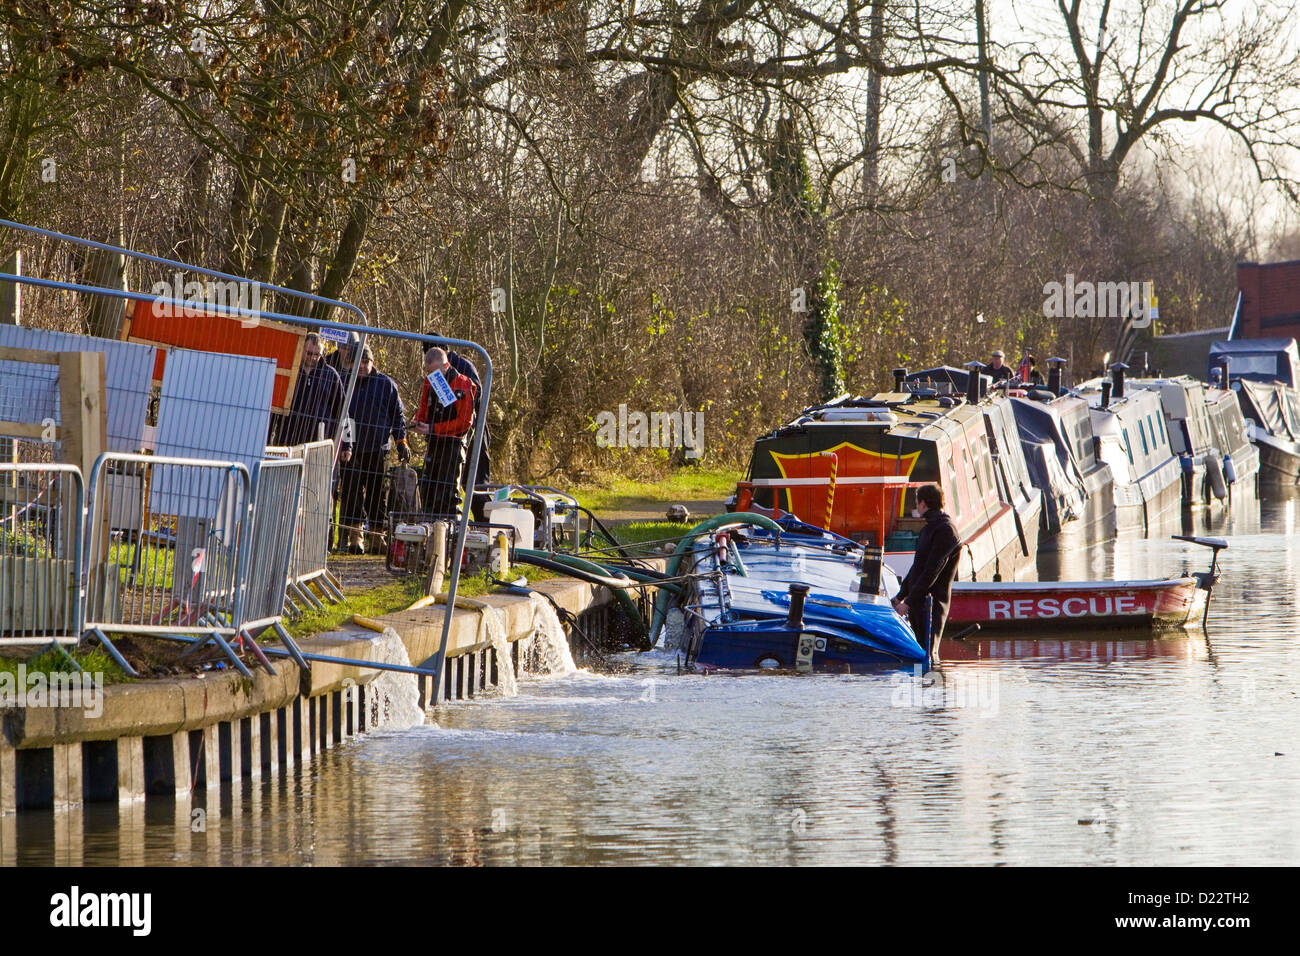 A flooded sunken canal boat in the recent floods Stock Photo